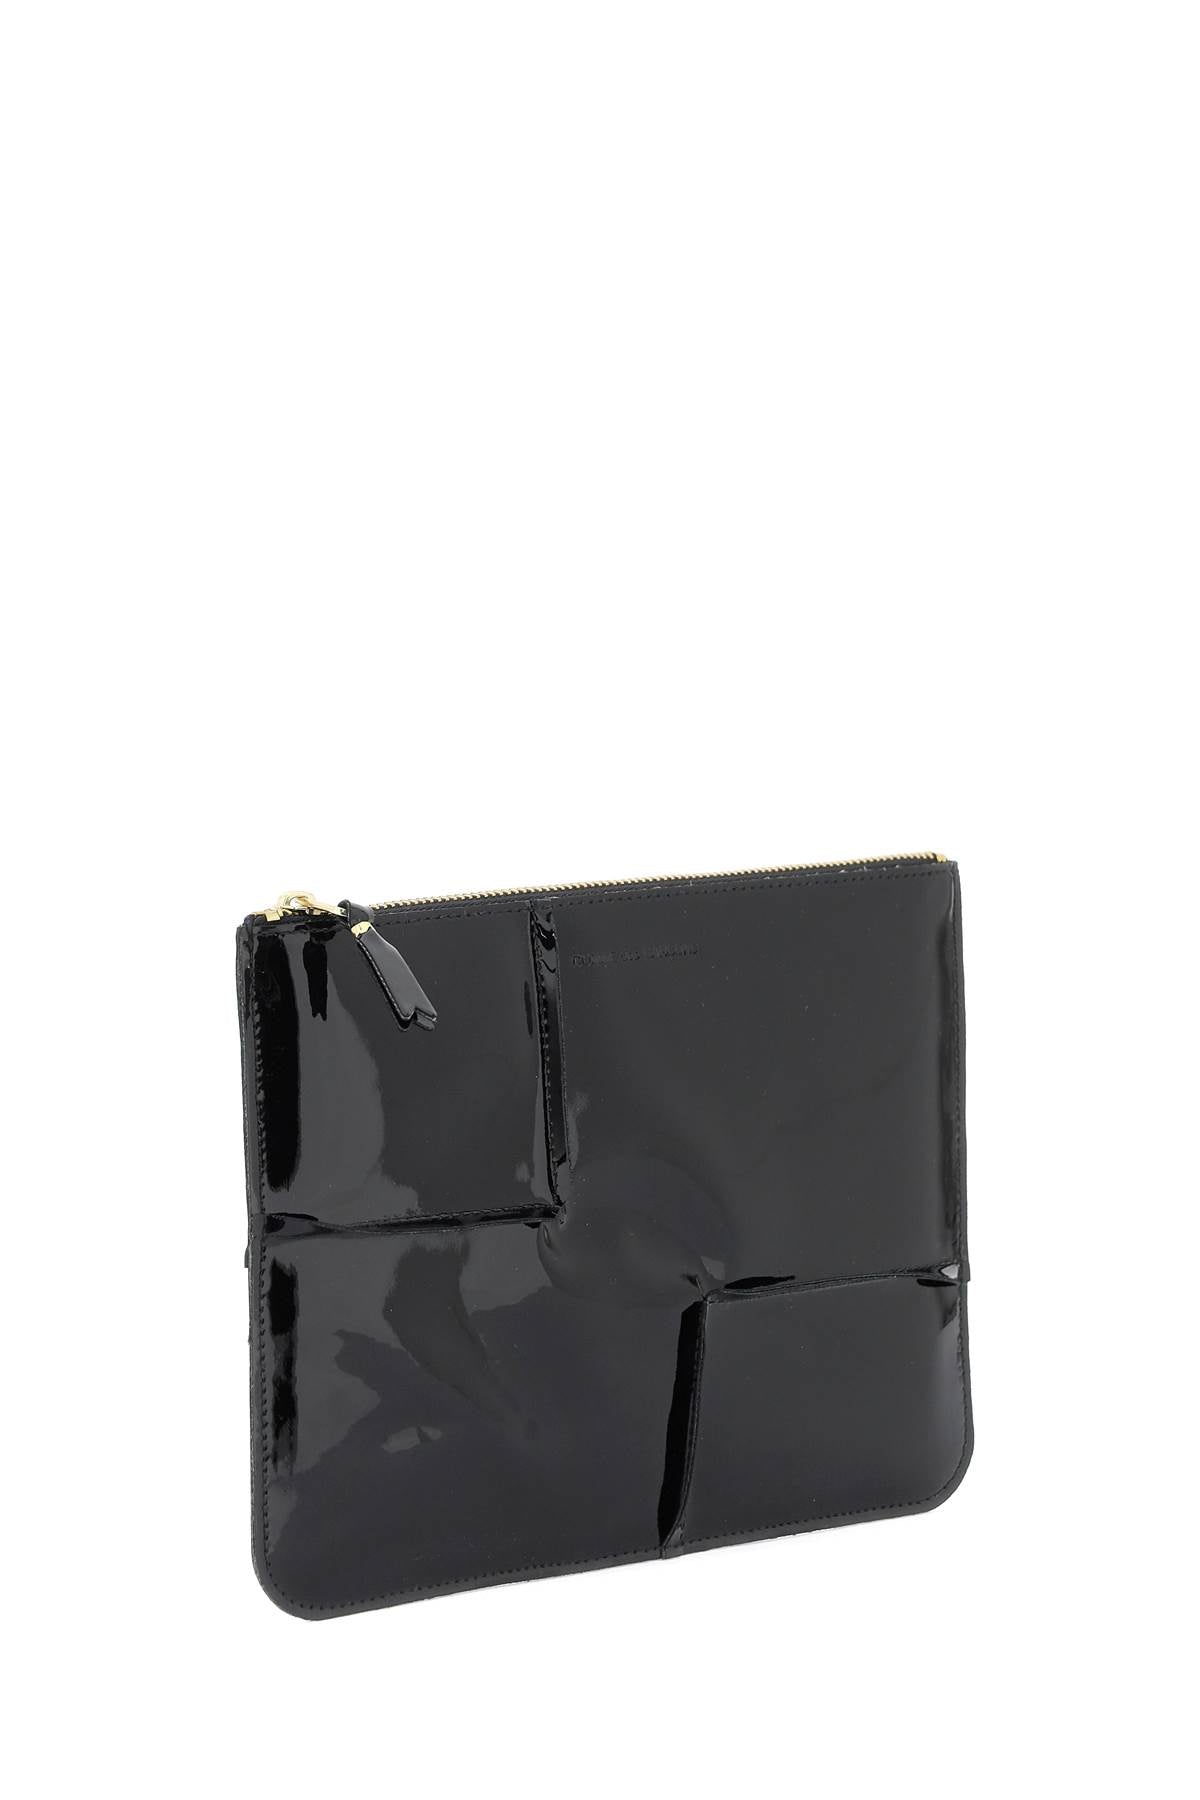 Comme des garcons wallet glossy patent leather-2